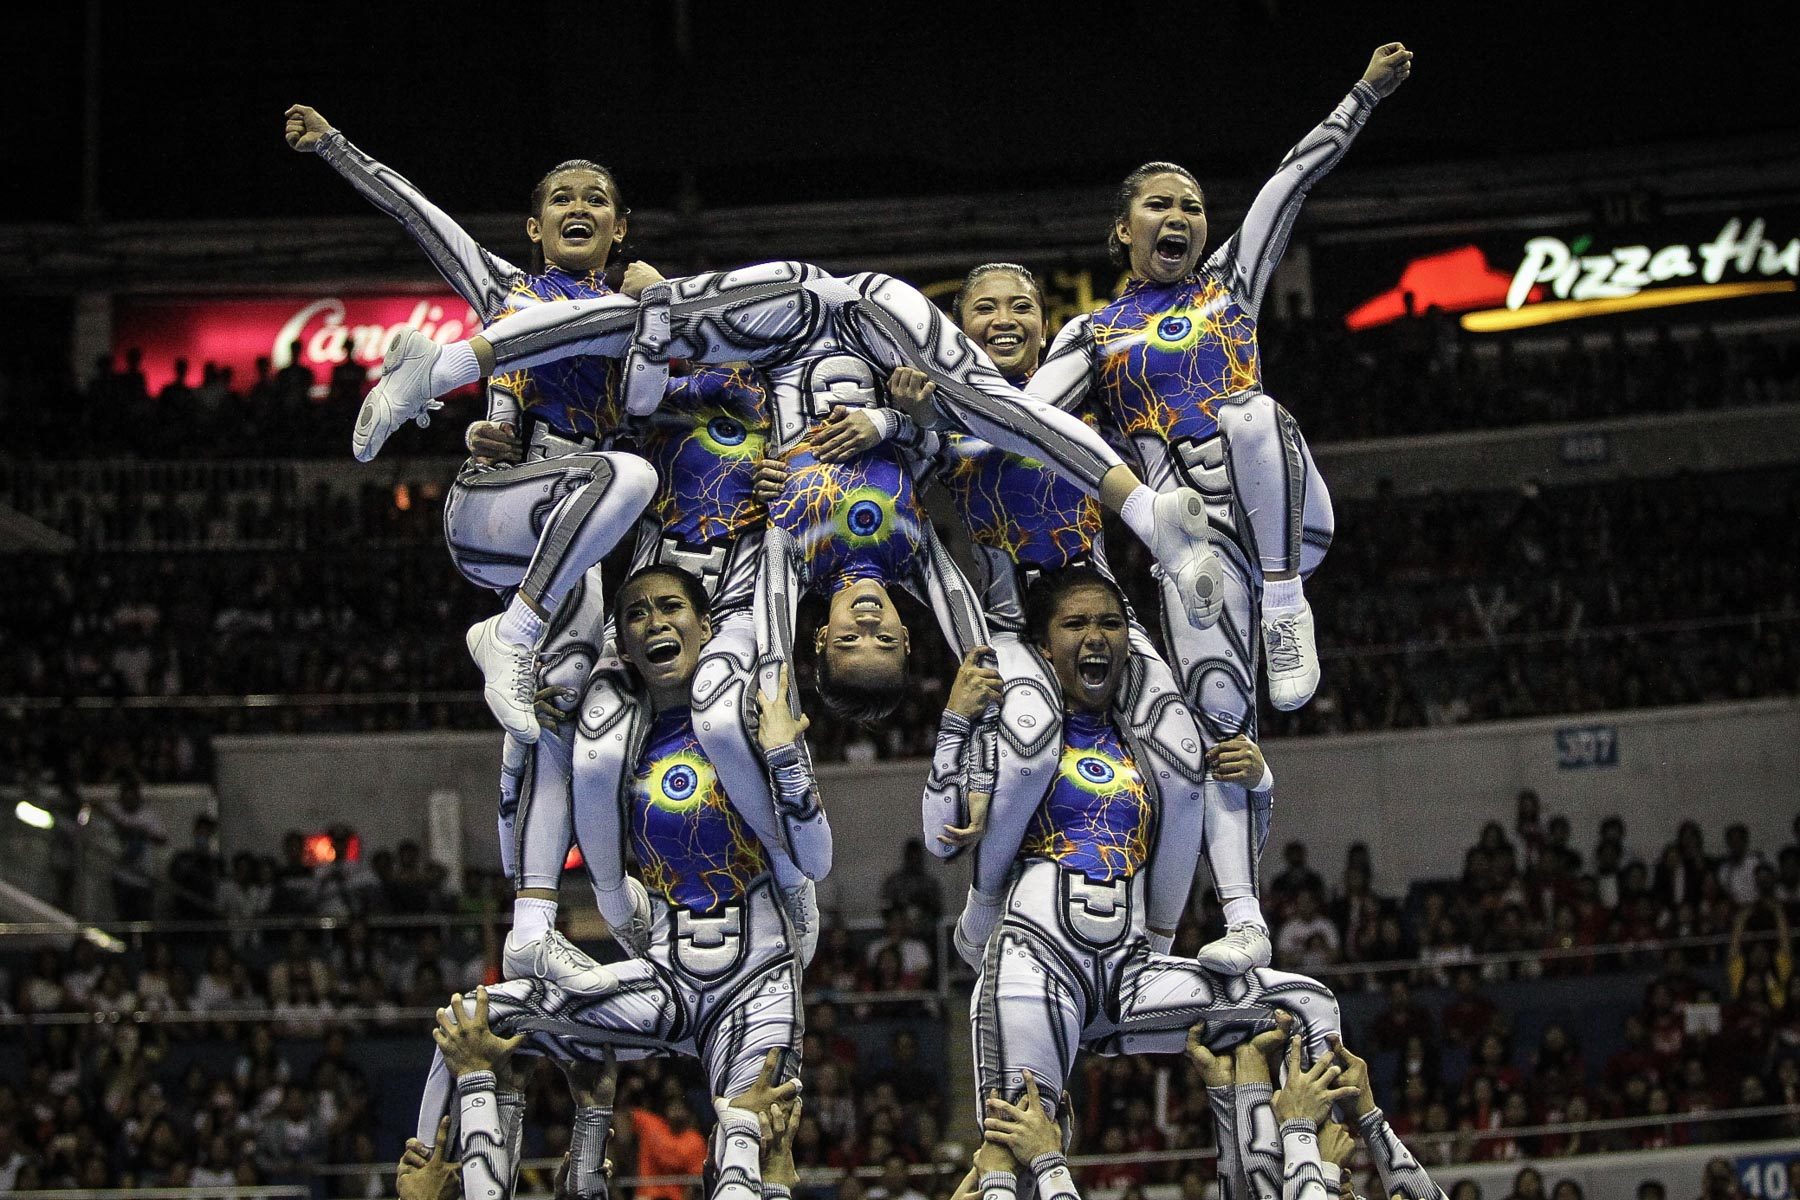 Dynasty continues: NU Pep Squad wins 4th straight UAAP Cheerdance title